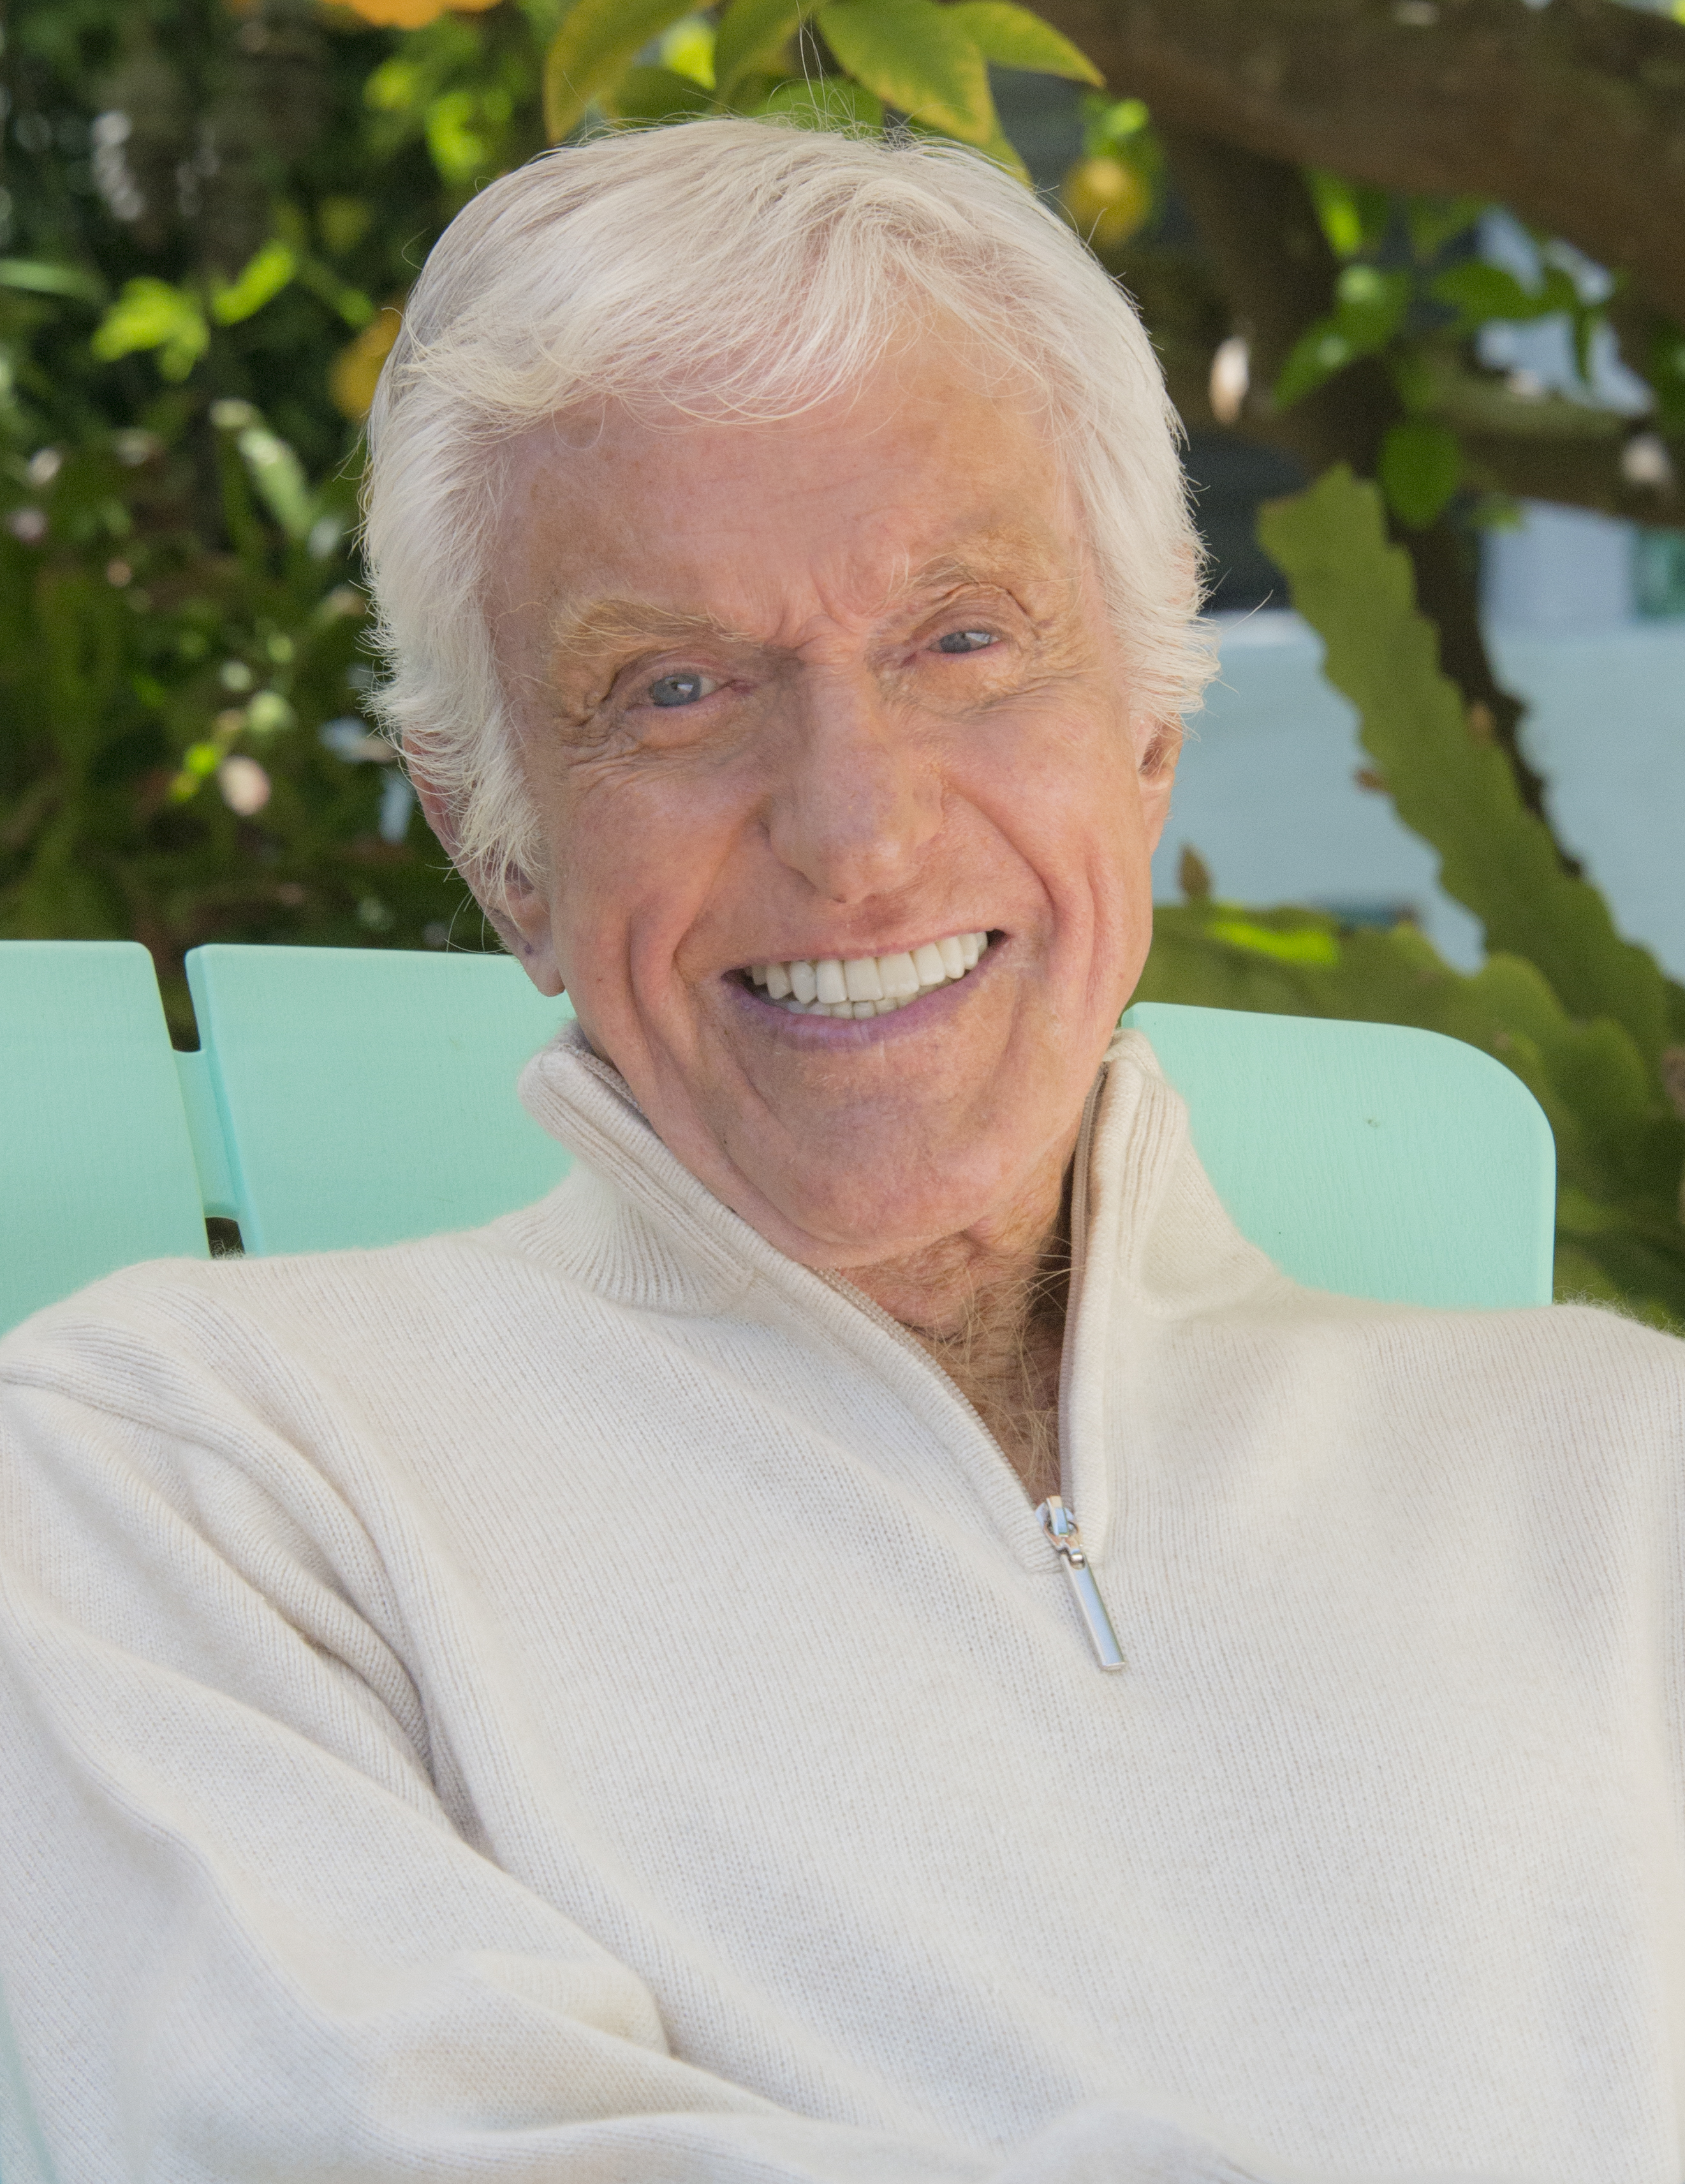 Dick Van Dyke photographed at home during a photo shoot on April 21, 2016, in Malibu, California. | Source: Getty Images